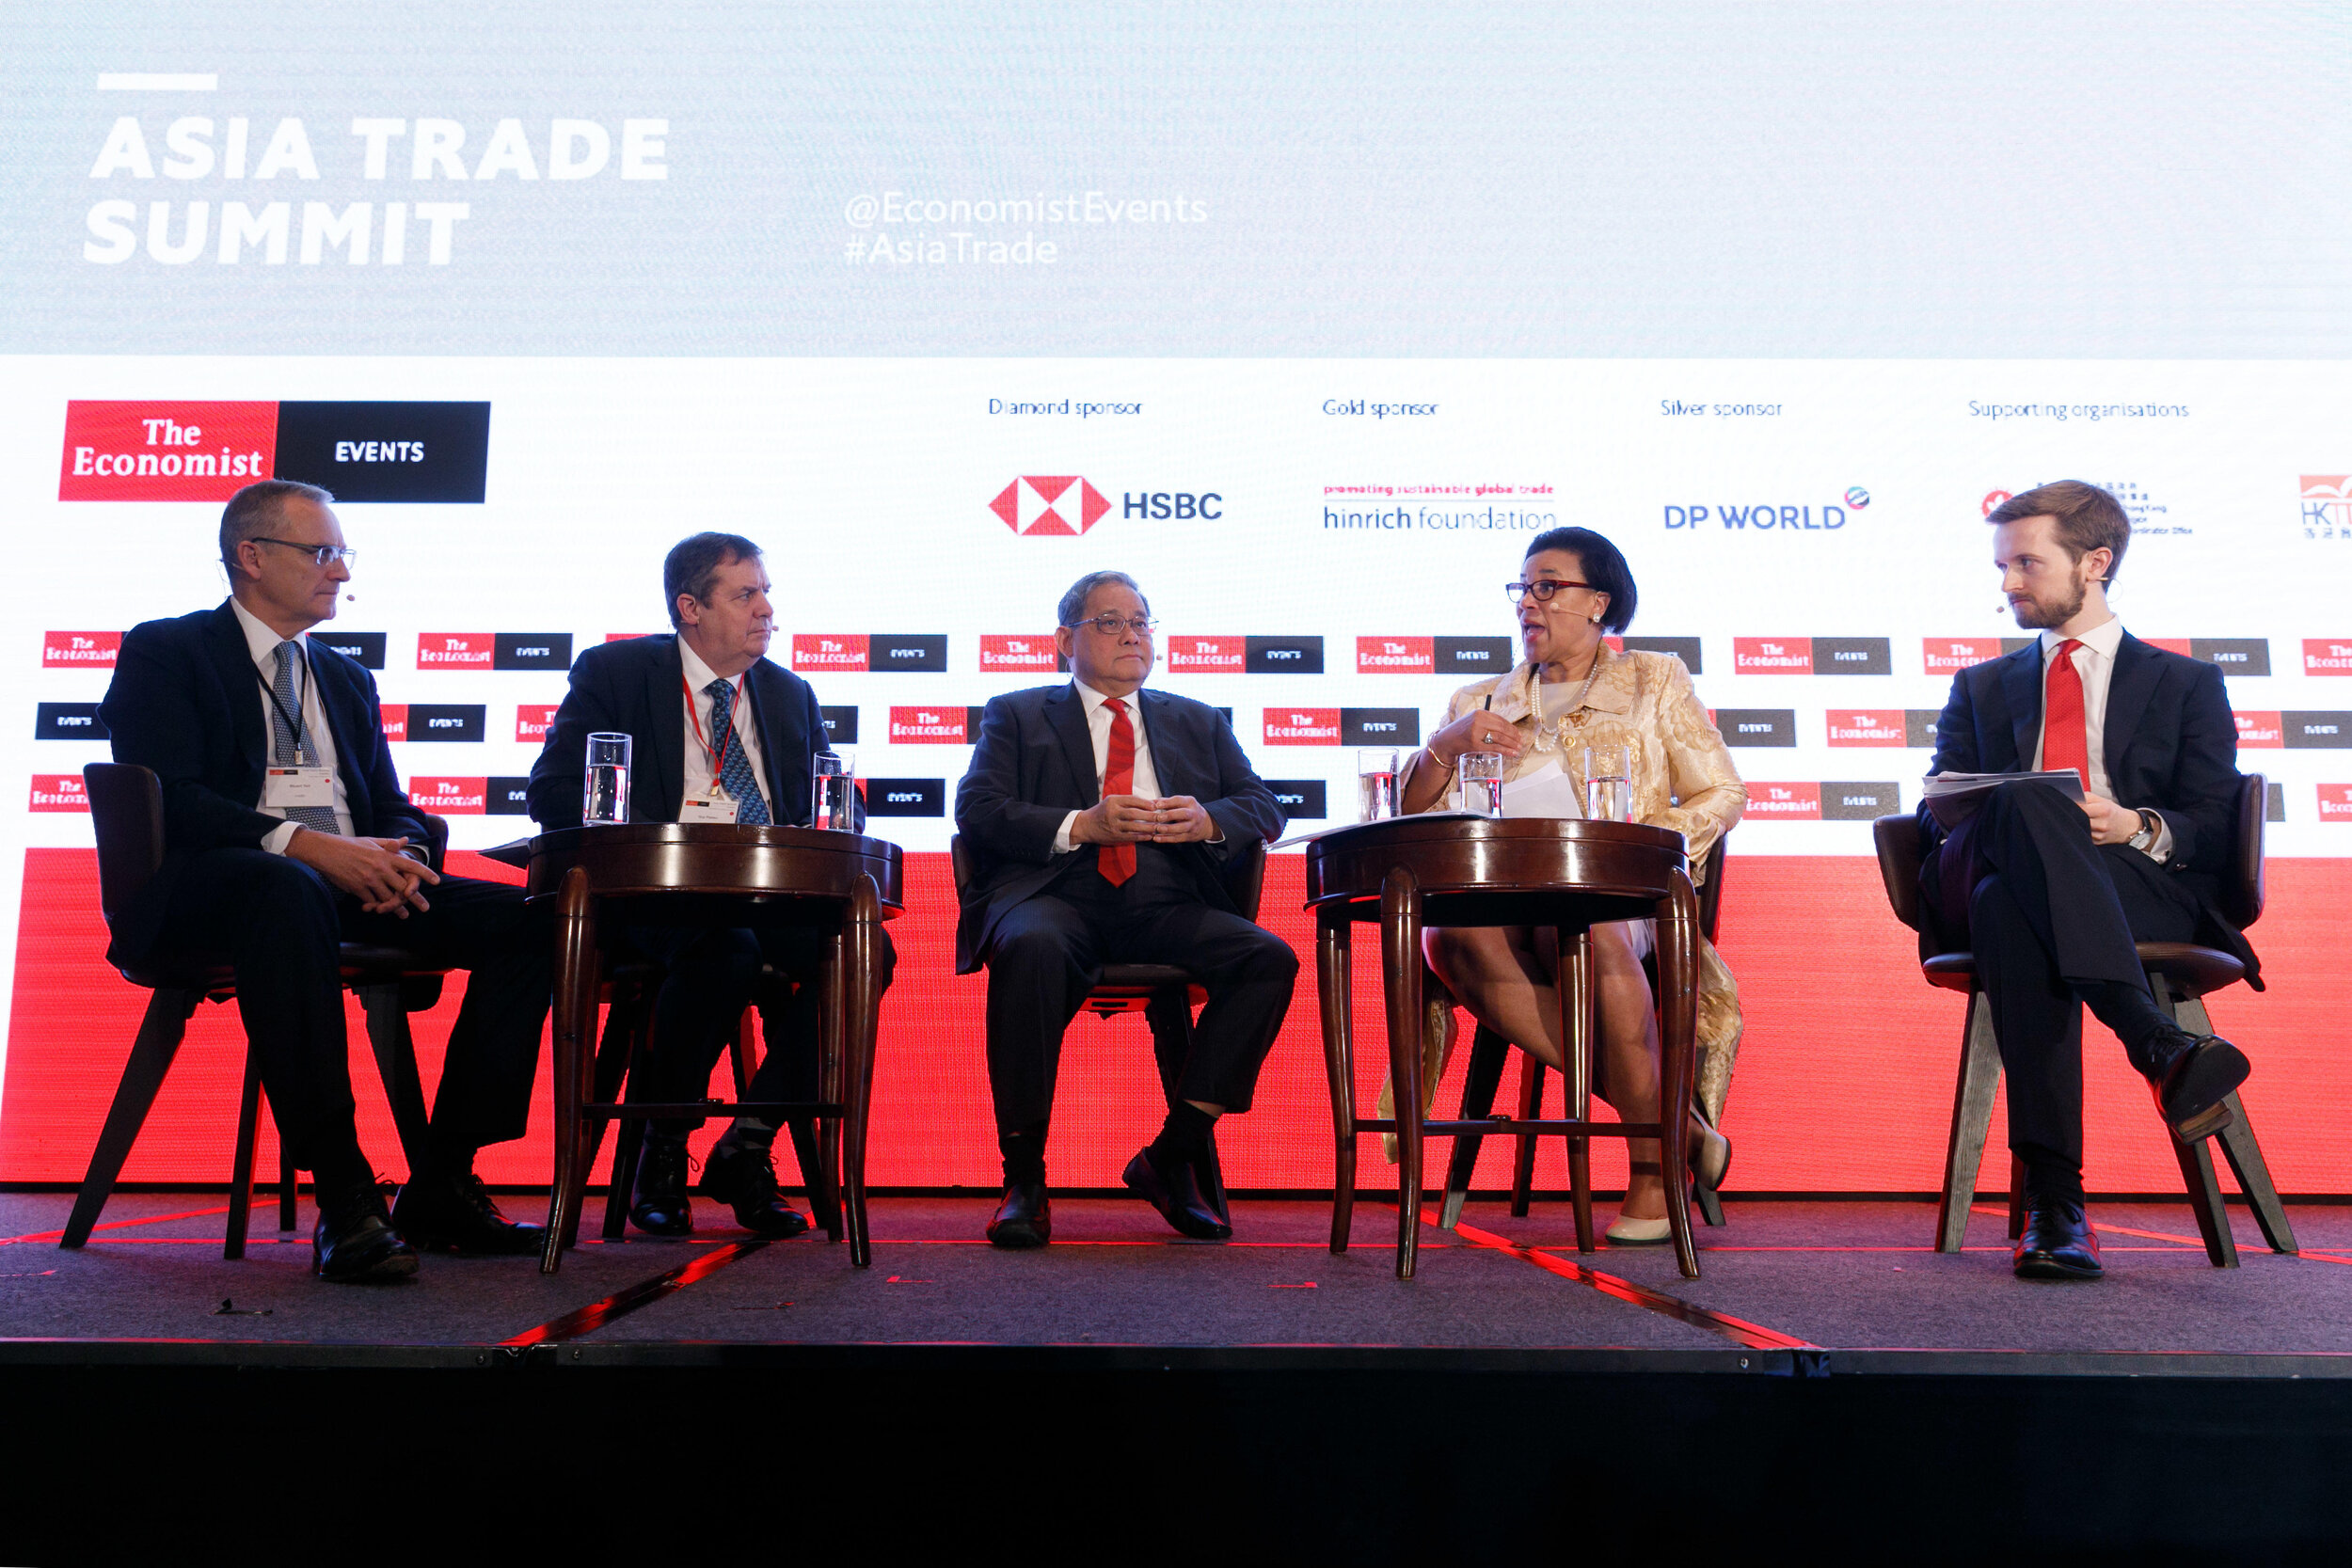   Moderating a panel at The Economist Event’s Asia Trade Summit in Hong Kong  